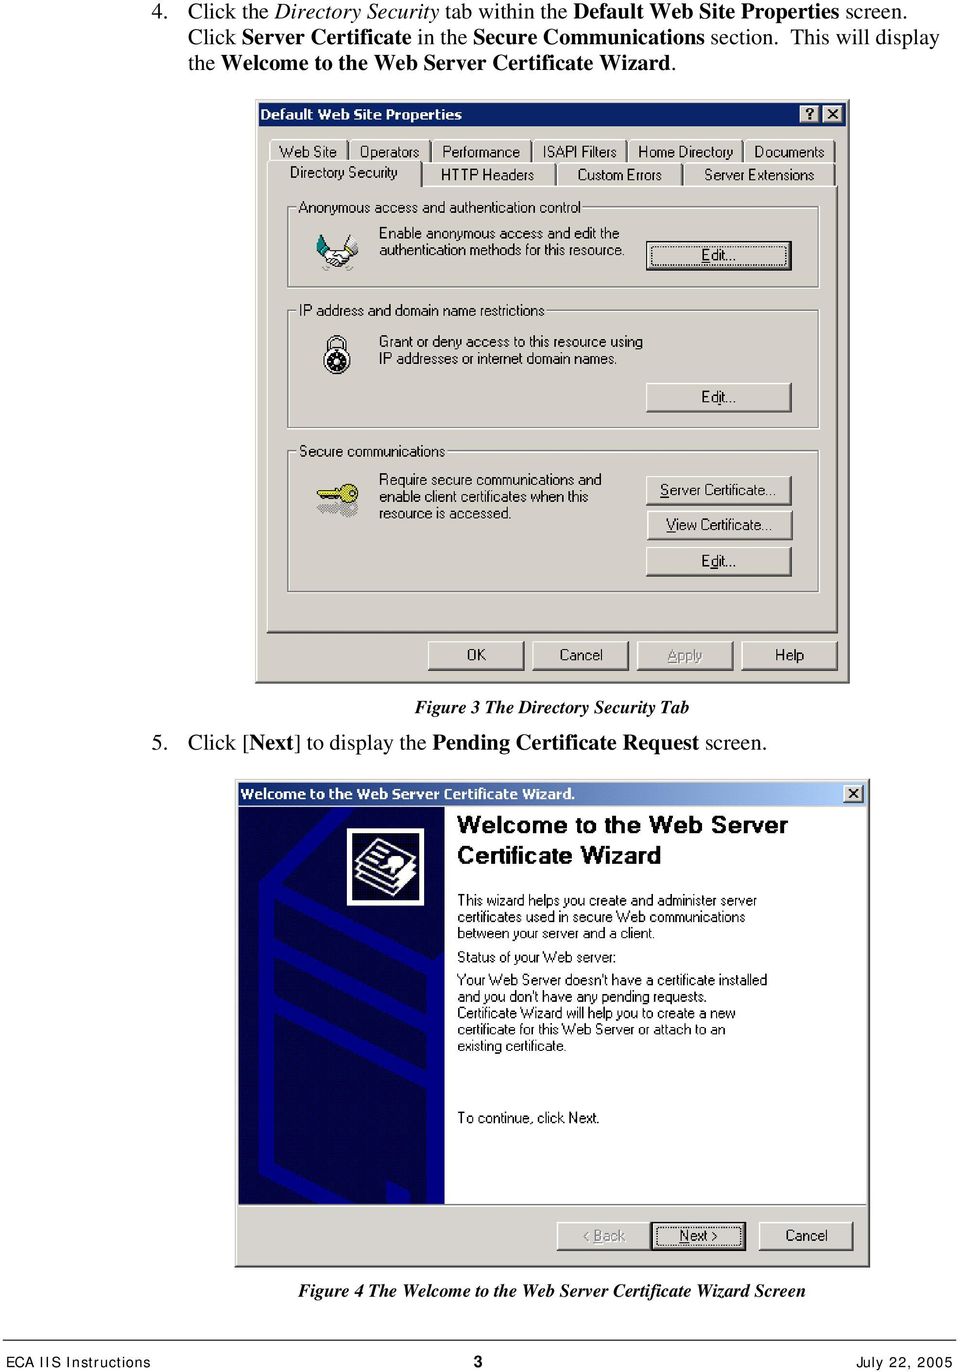 This will display the Welcome to the Web Server Certificate Wizard.